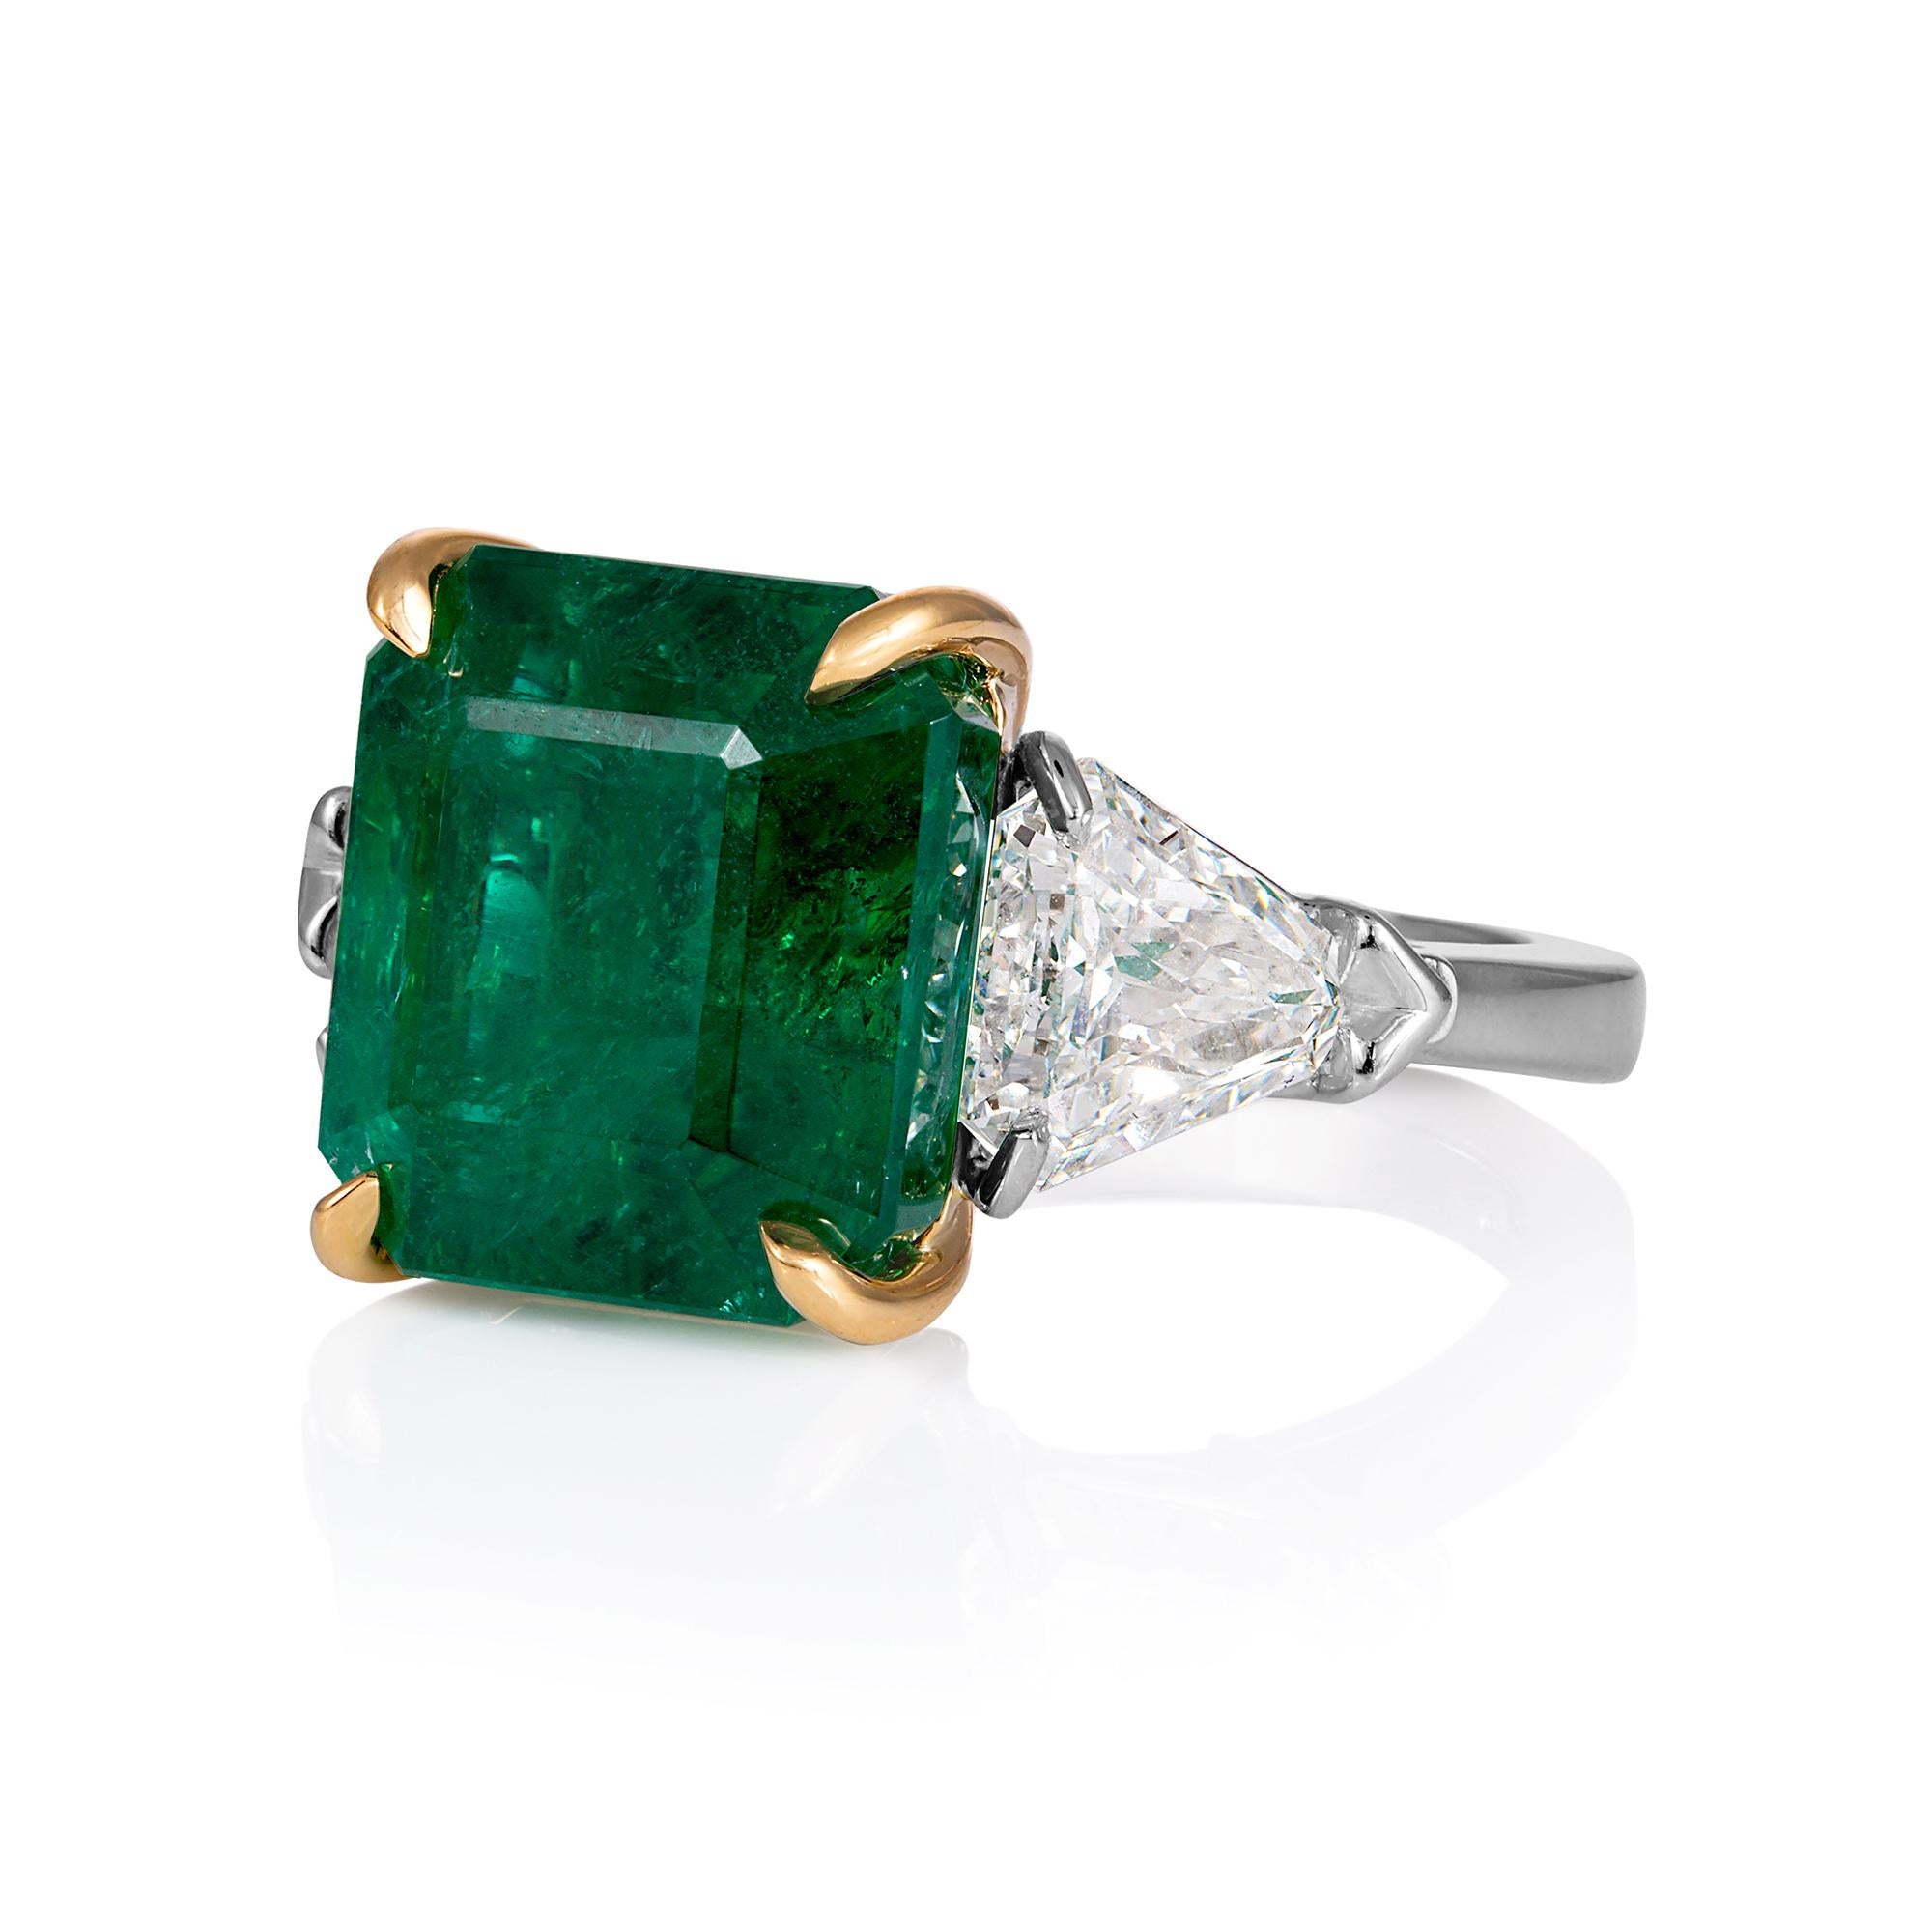 Impressive and Timeless 3 Stone Engagement Anniversary Ring with GIA 11.27ct Square Green Emerald & Diamonds.
This jewel will make a great addition to any GEM jewelry collection! It is rear to find an emerald over 3ct size, but over 11CT just